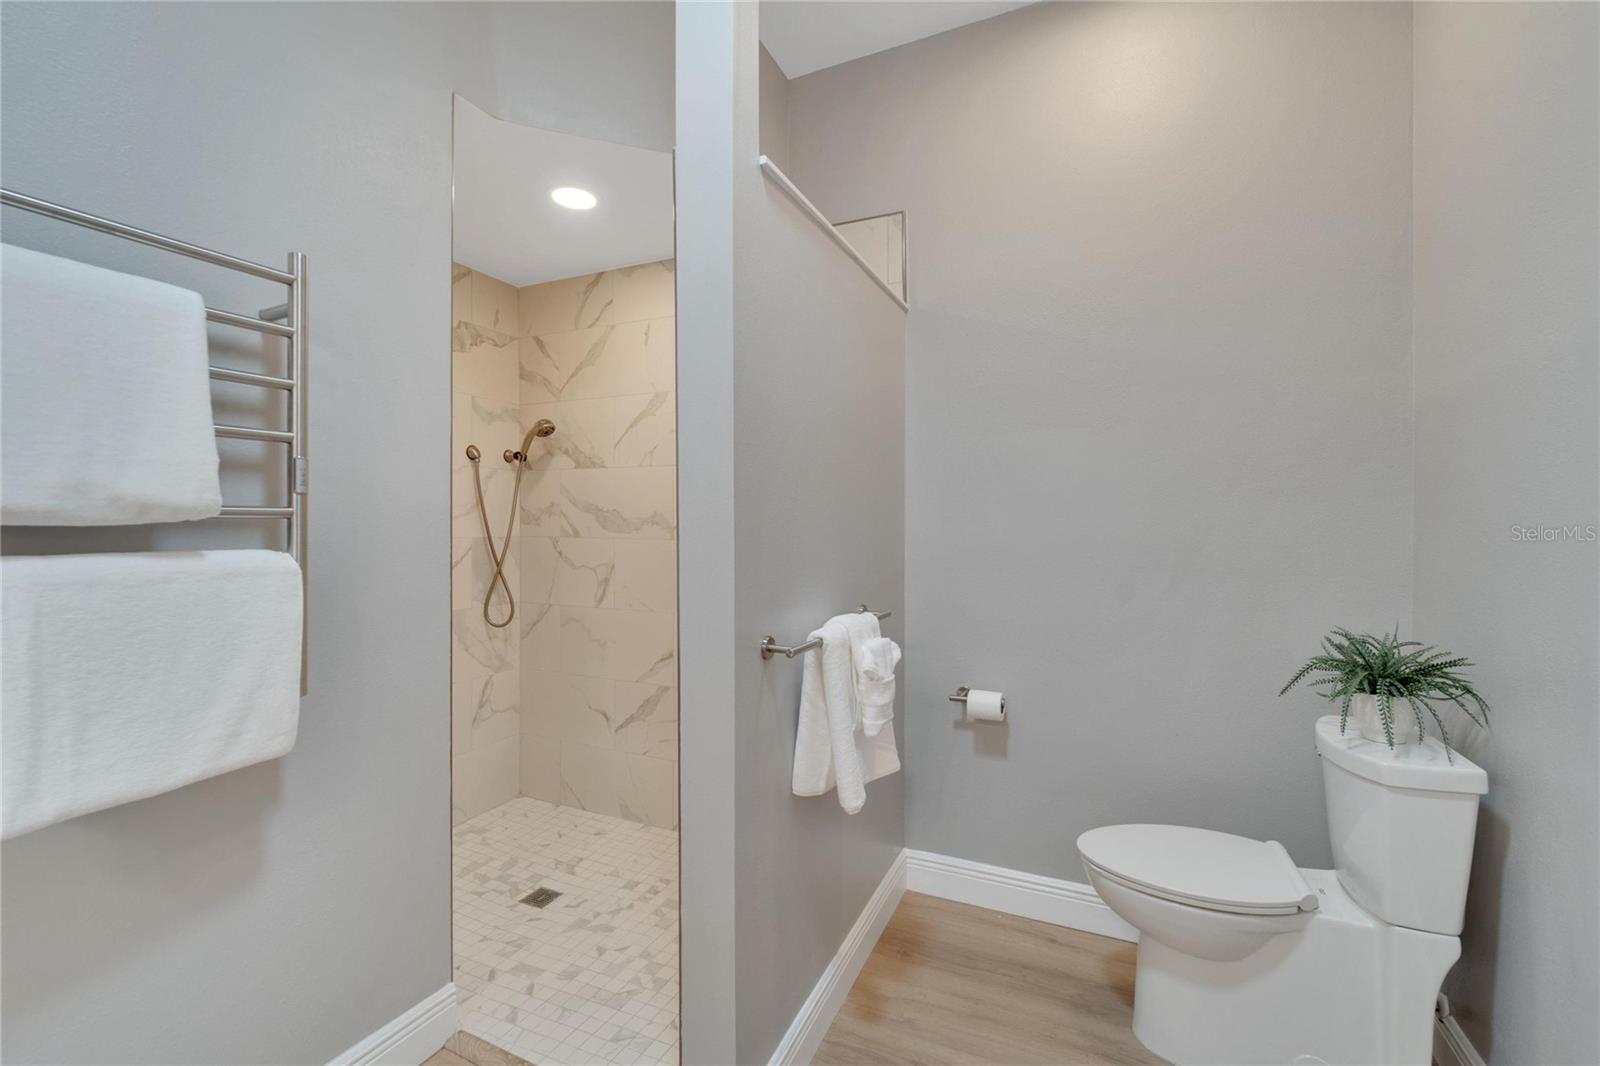 Hard-wired towel warmer, walk-in tiled shower with multiple shower heads, separate toilet area, freshly painted